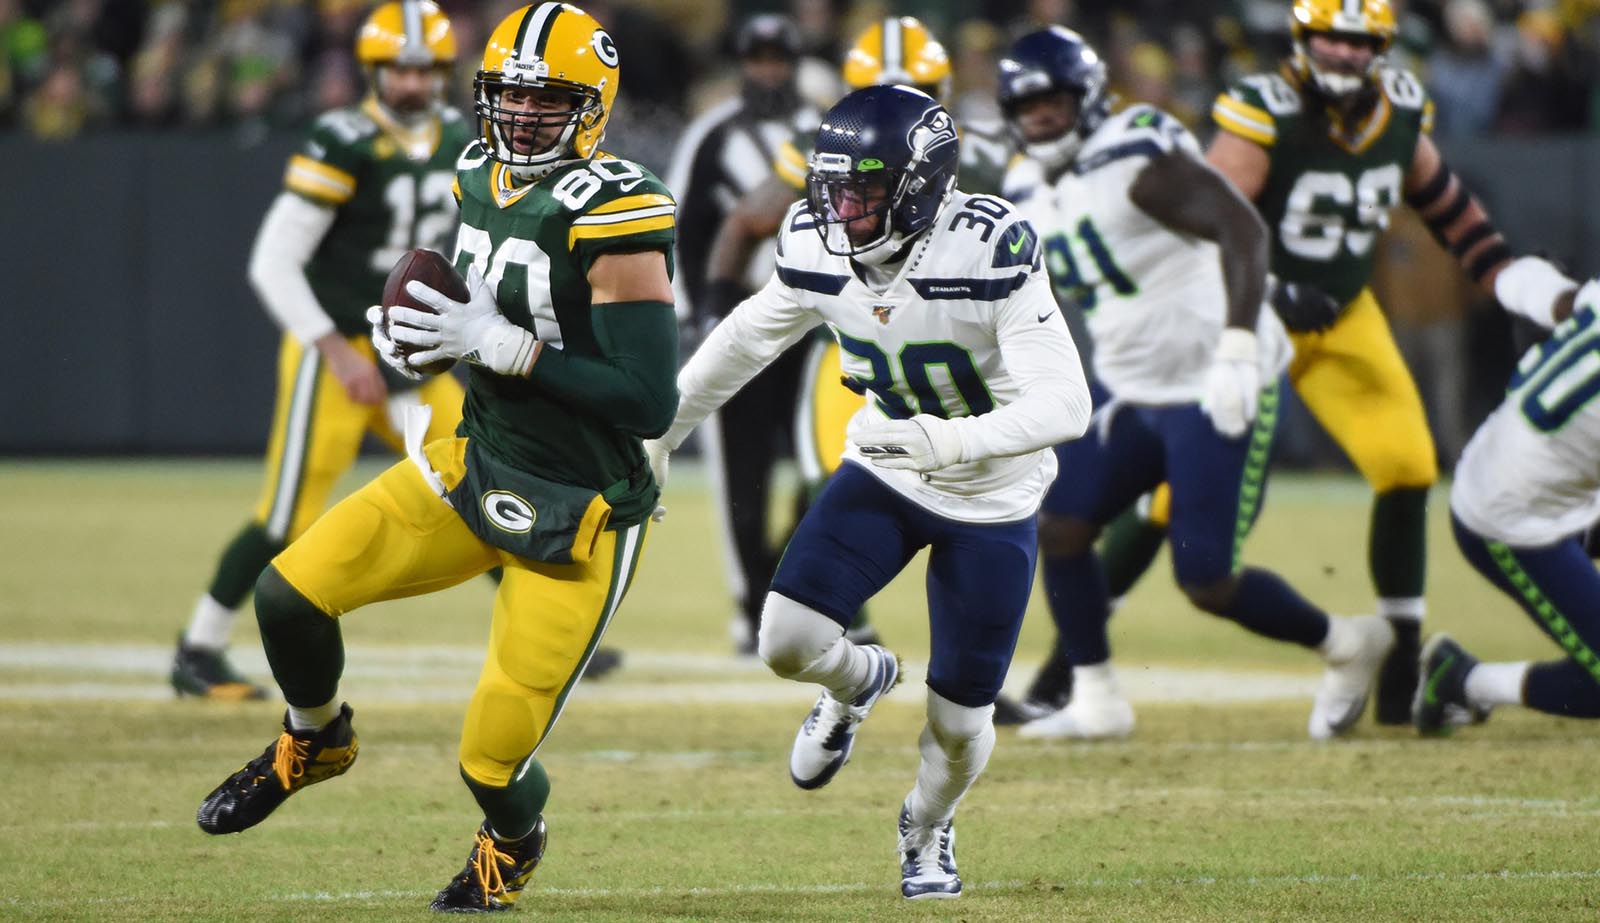 Packers Snap Counts: Graham makes big difference despite limited playing time